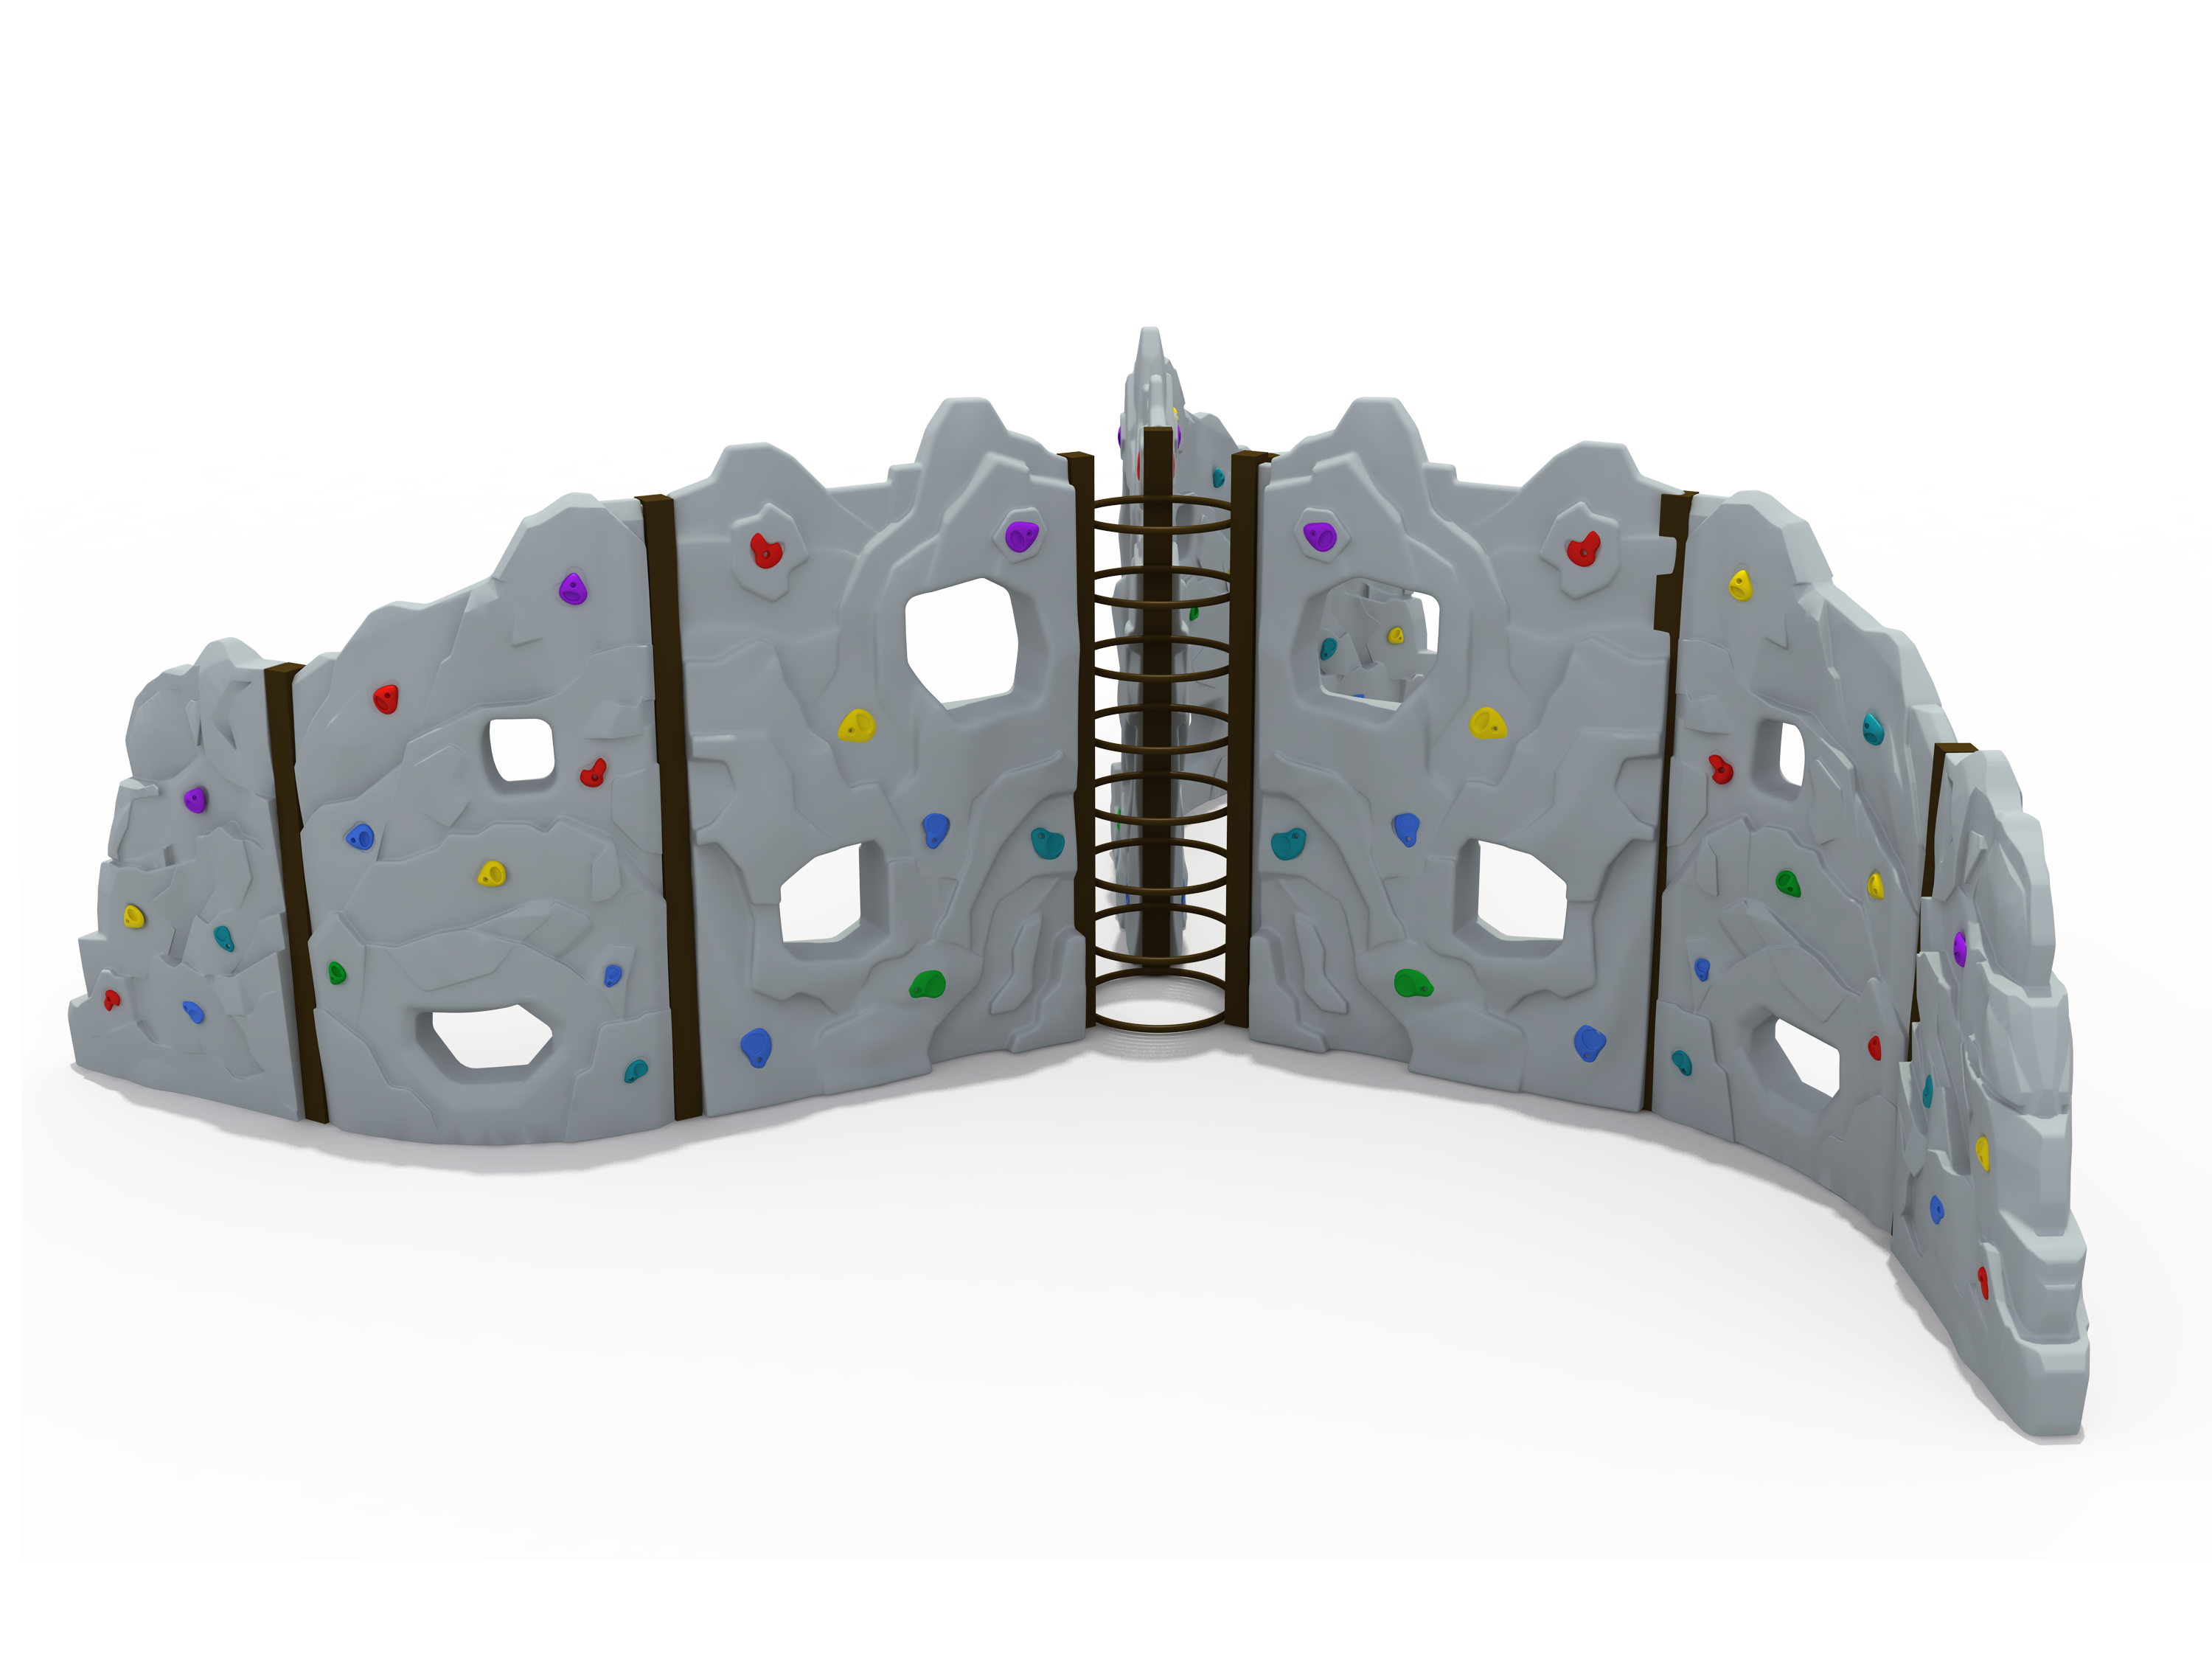 Cheap used rock climbing wall holds games for kids